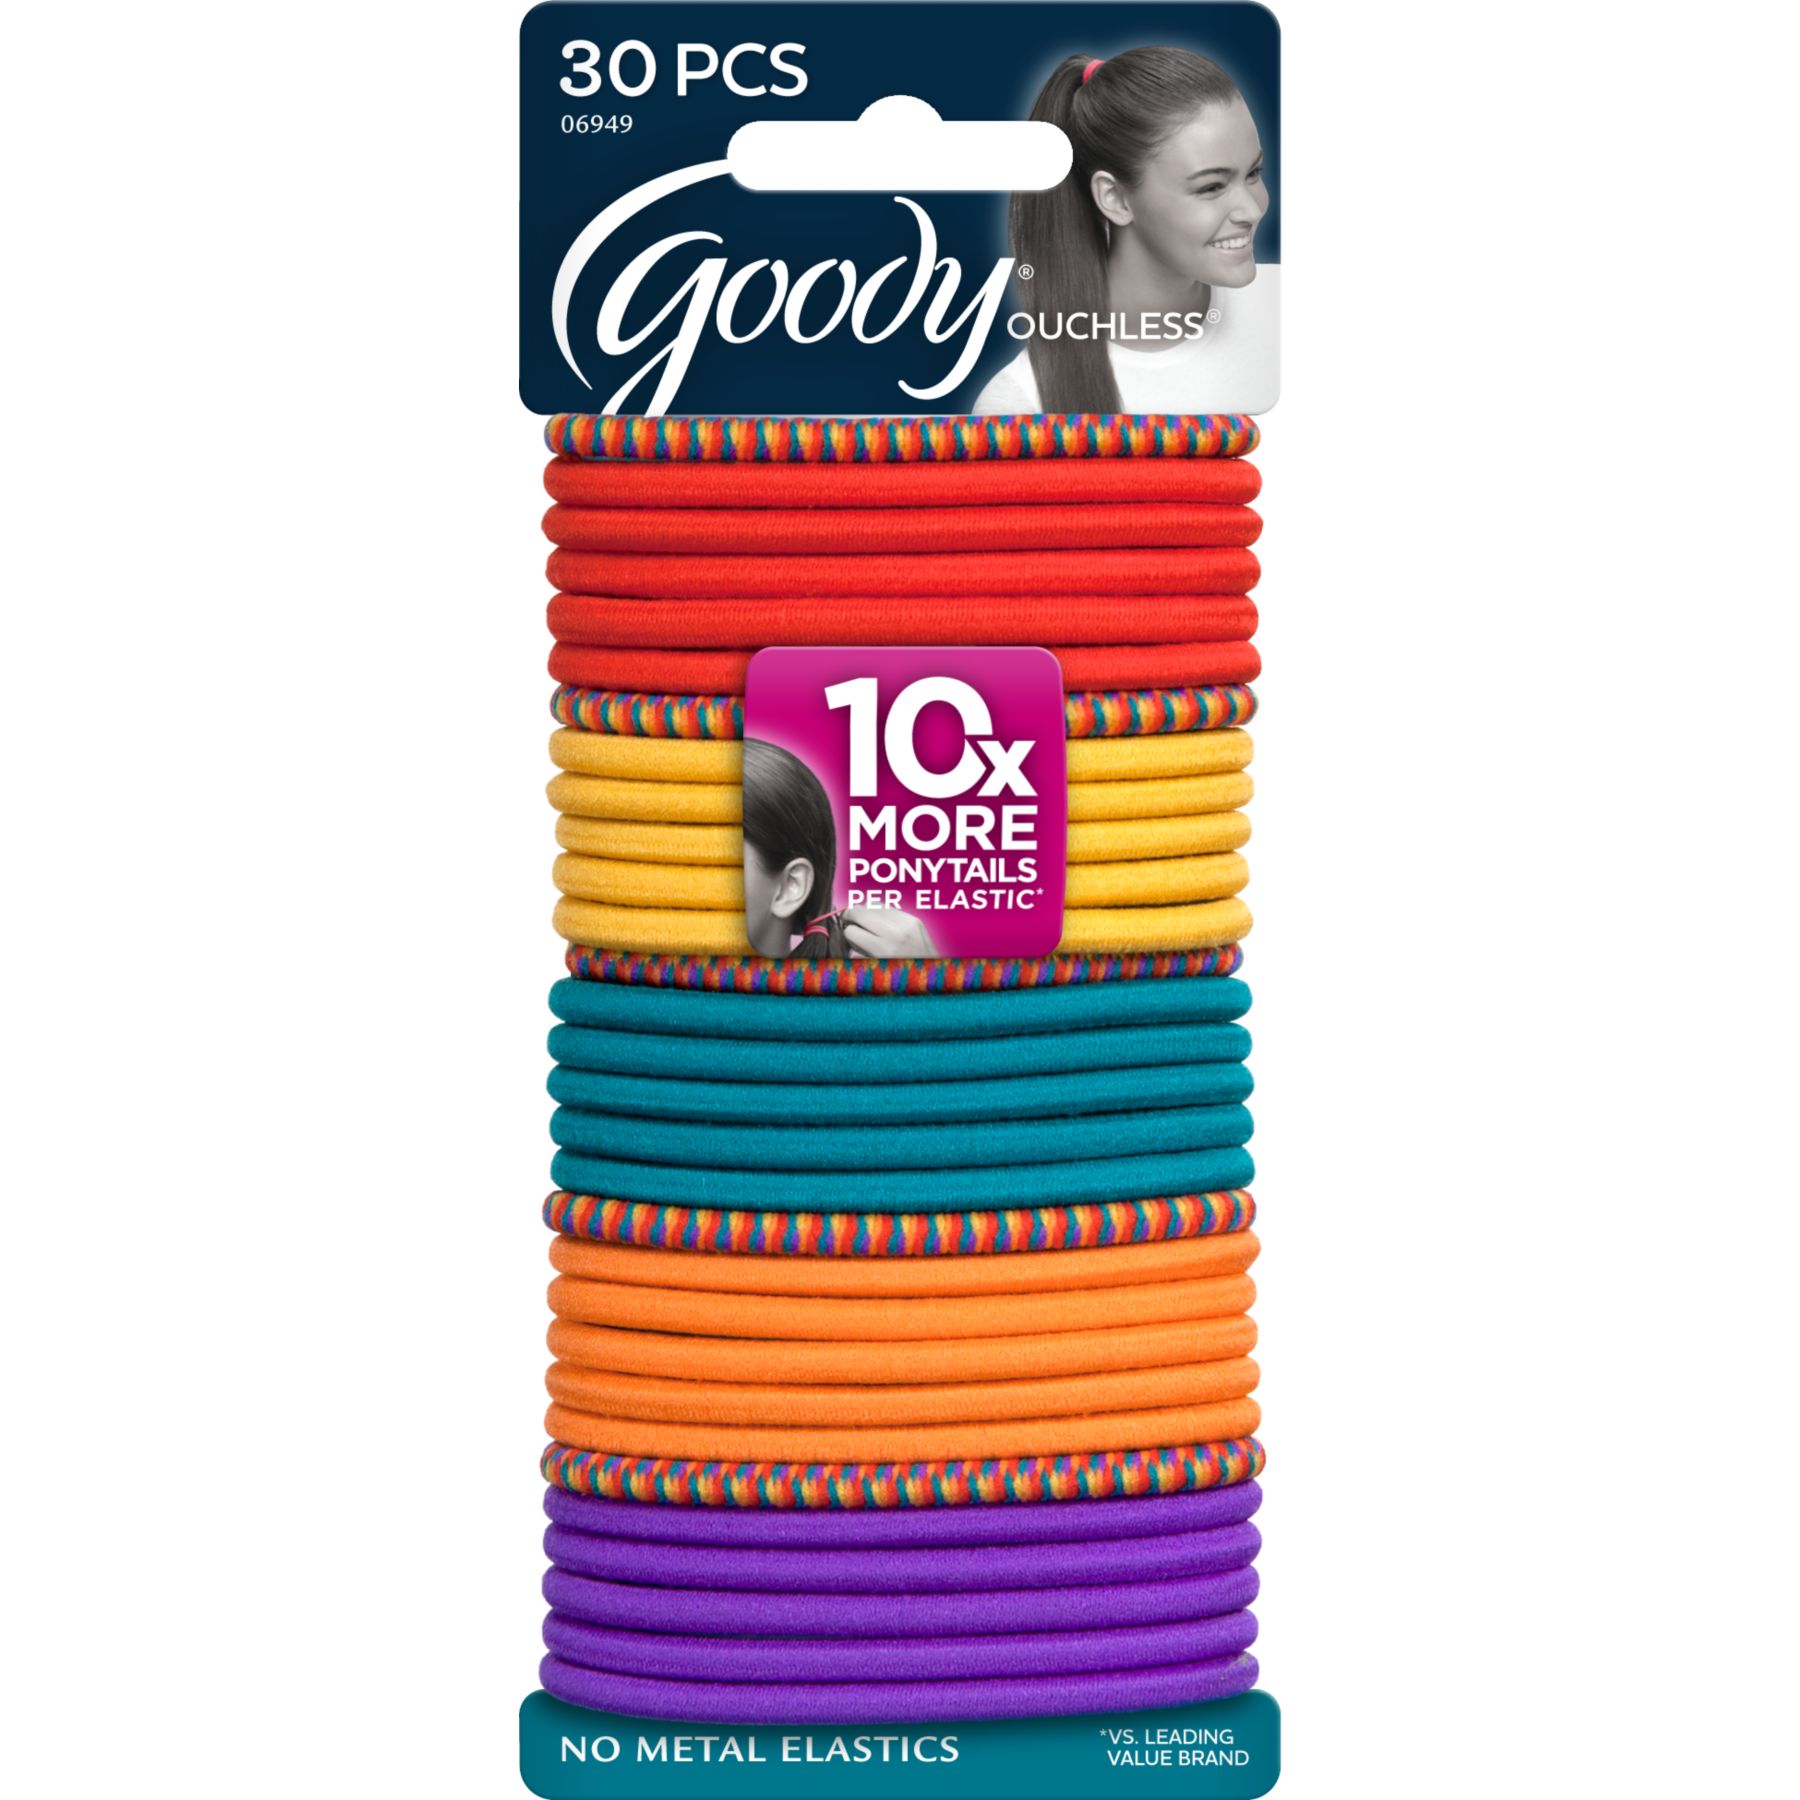 Goody Ouchless No-Metal Elastics  Festival Primary  30 Pcs